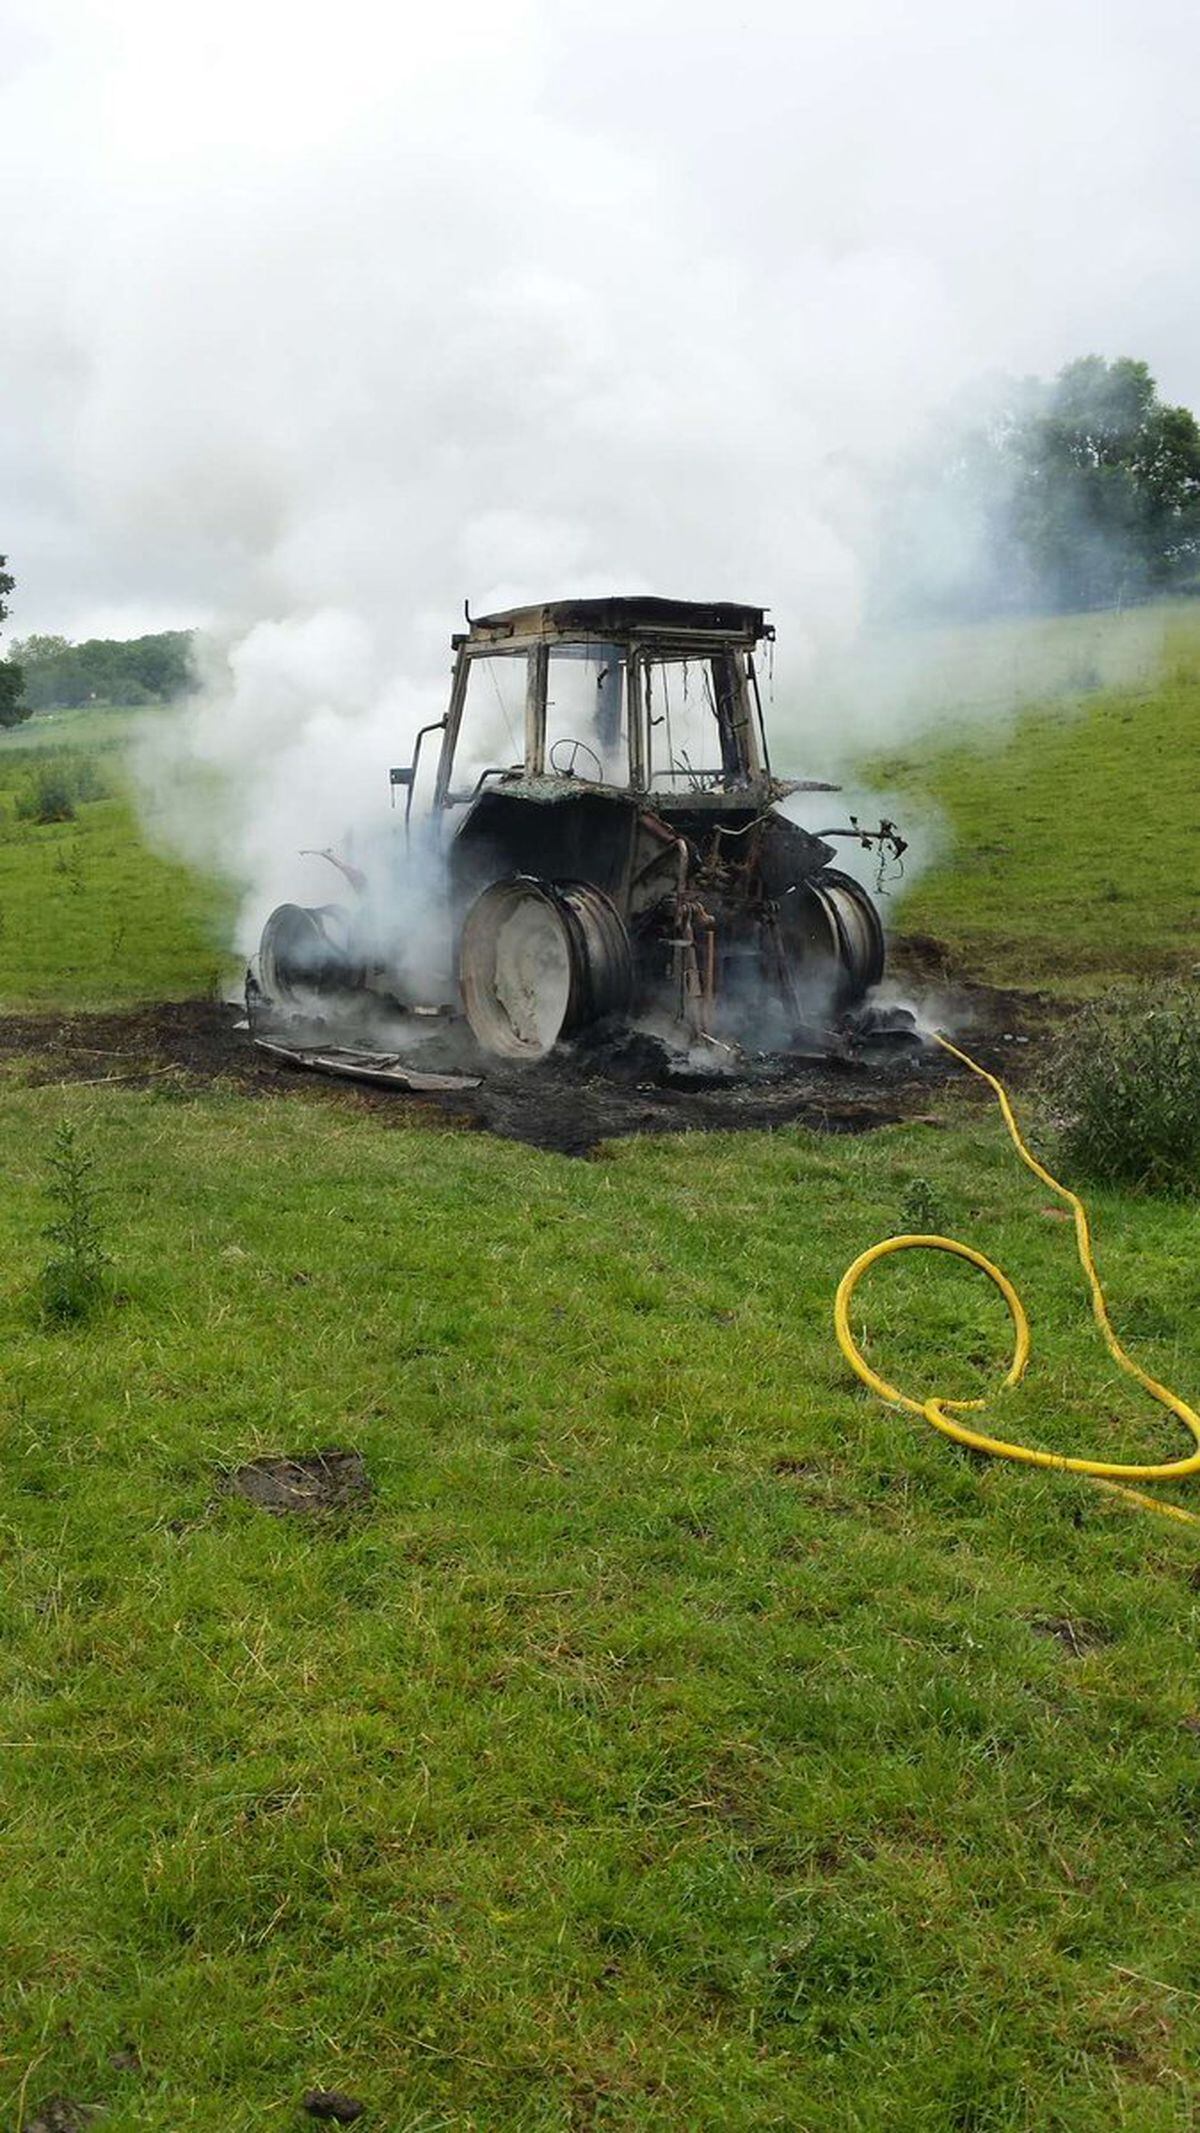 The tractor fire - picture: @sfrs_wenlock